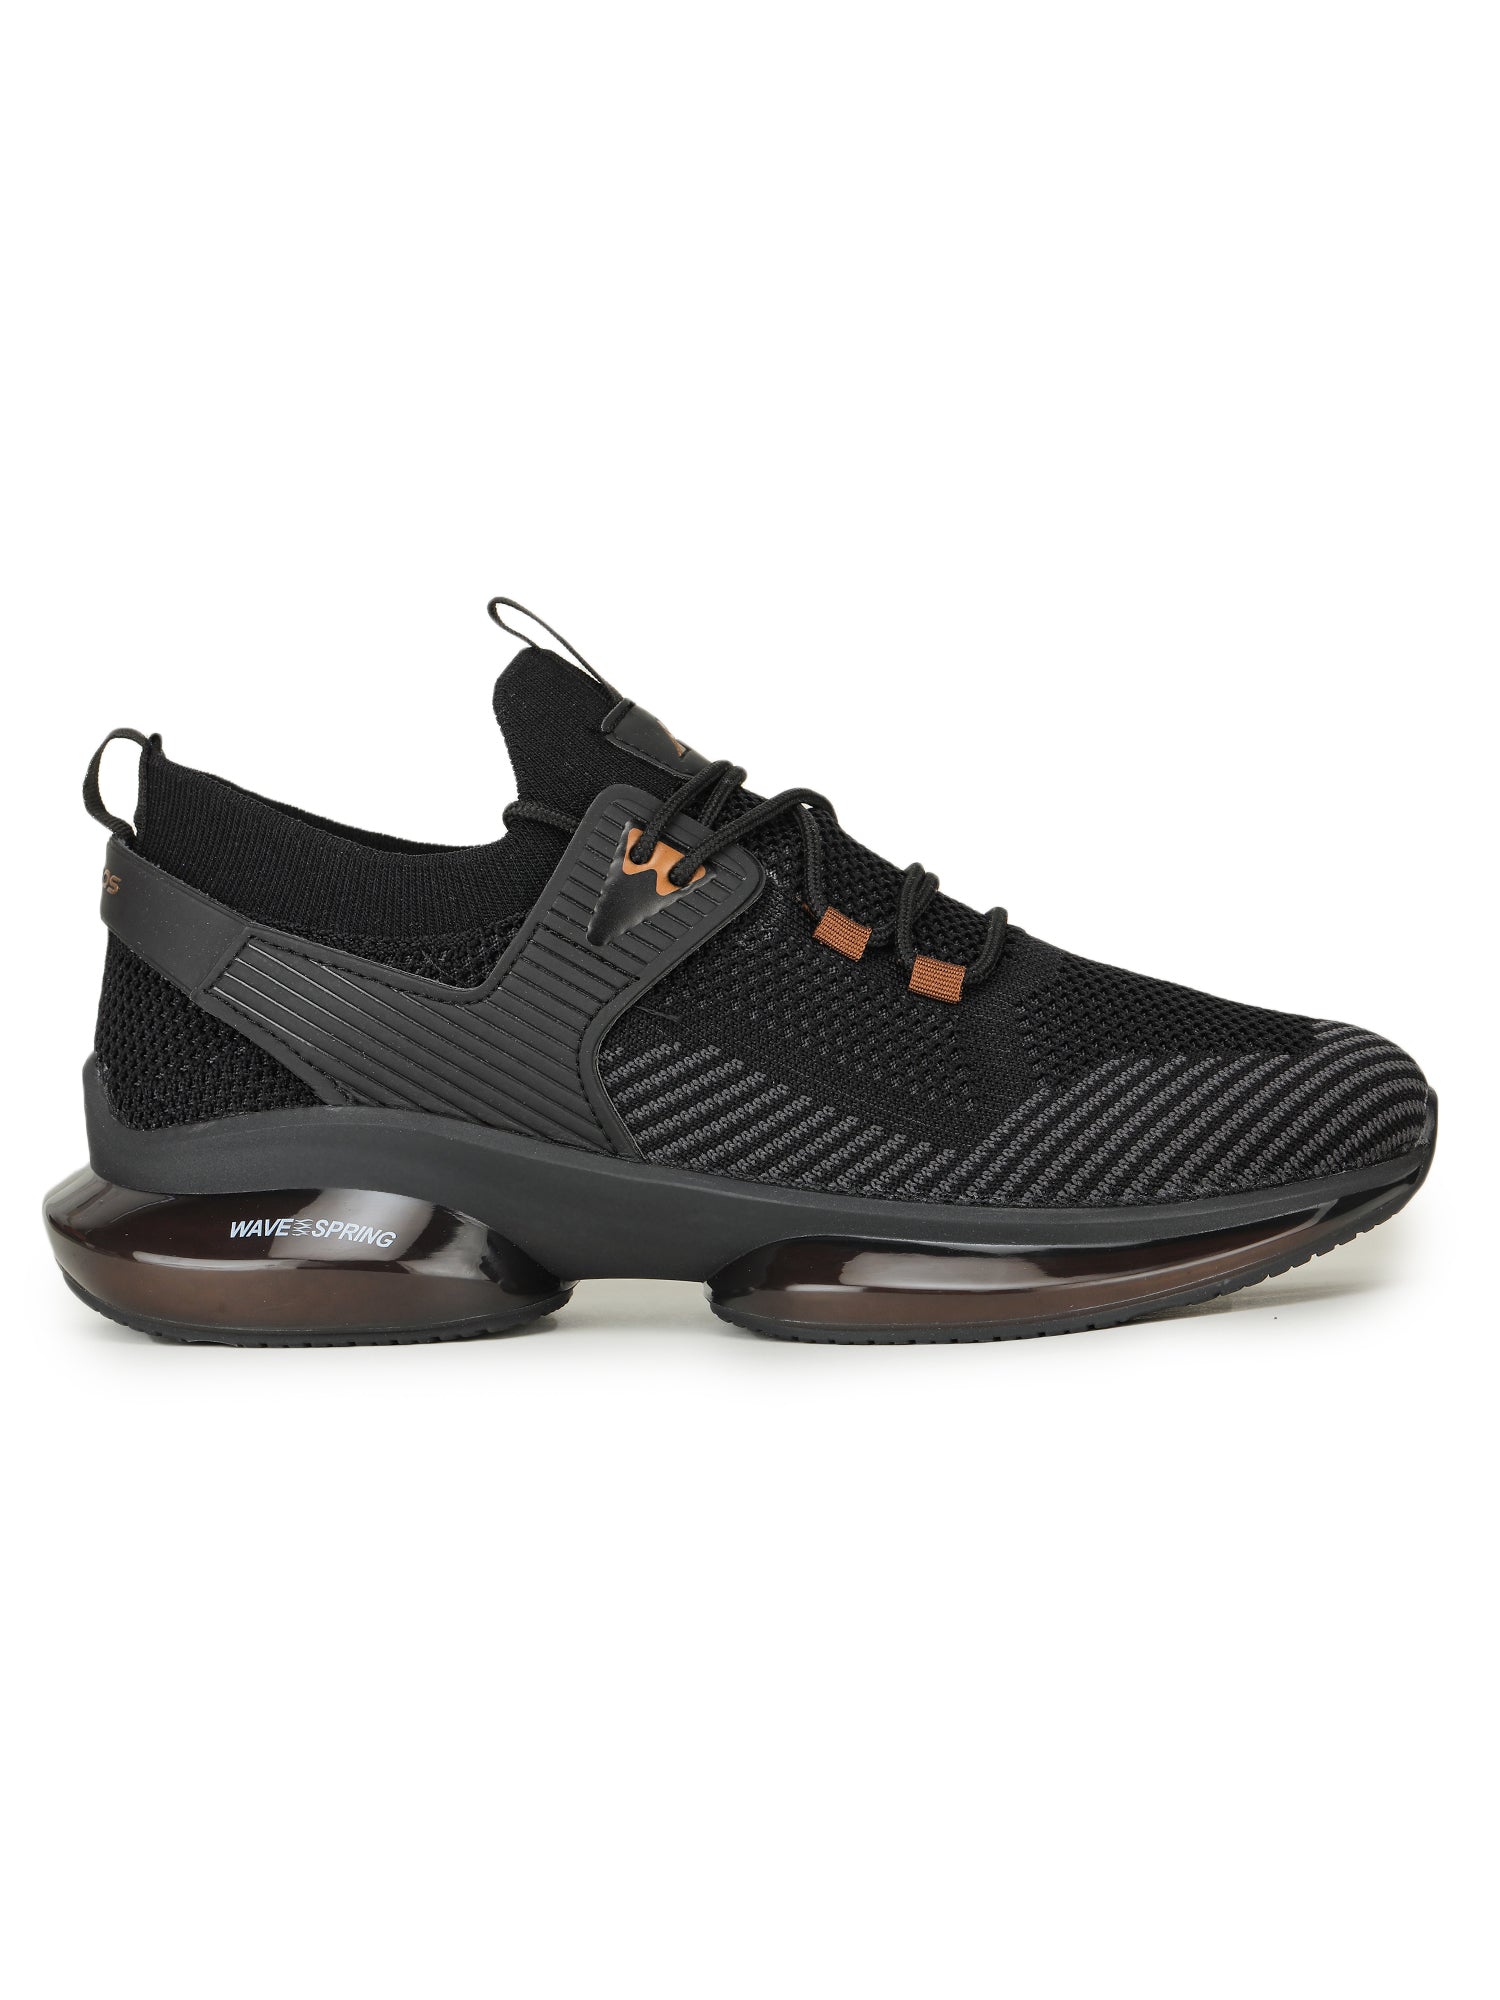 ABROS BOSS Sports Shoes For Men's